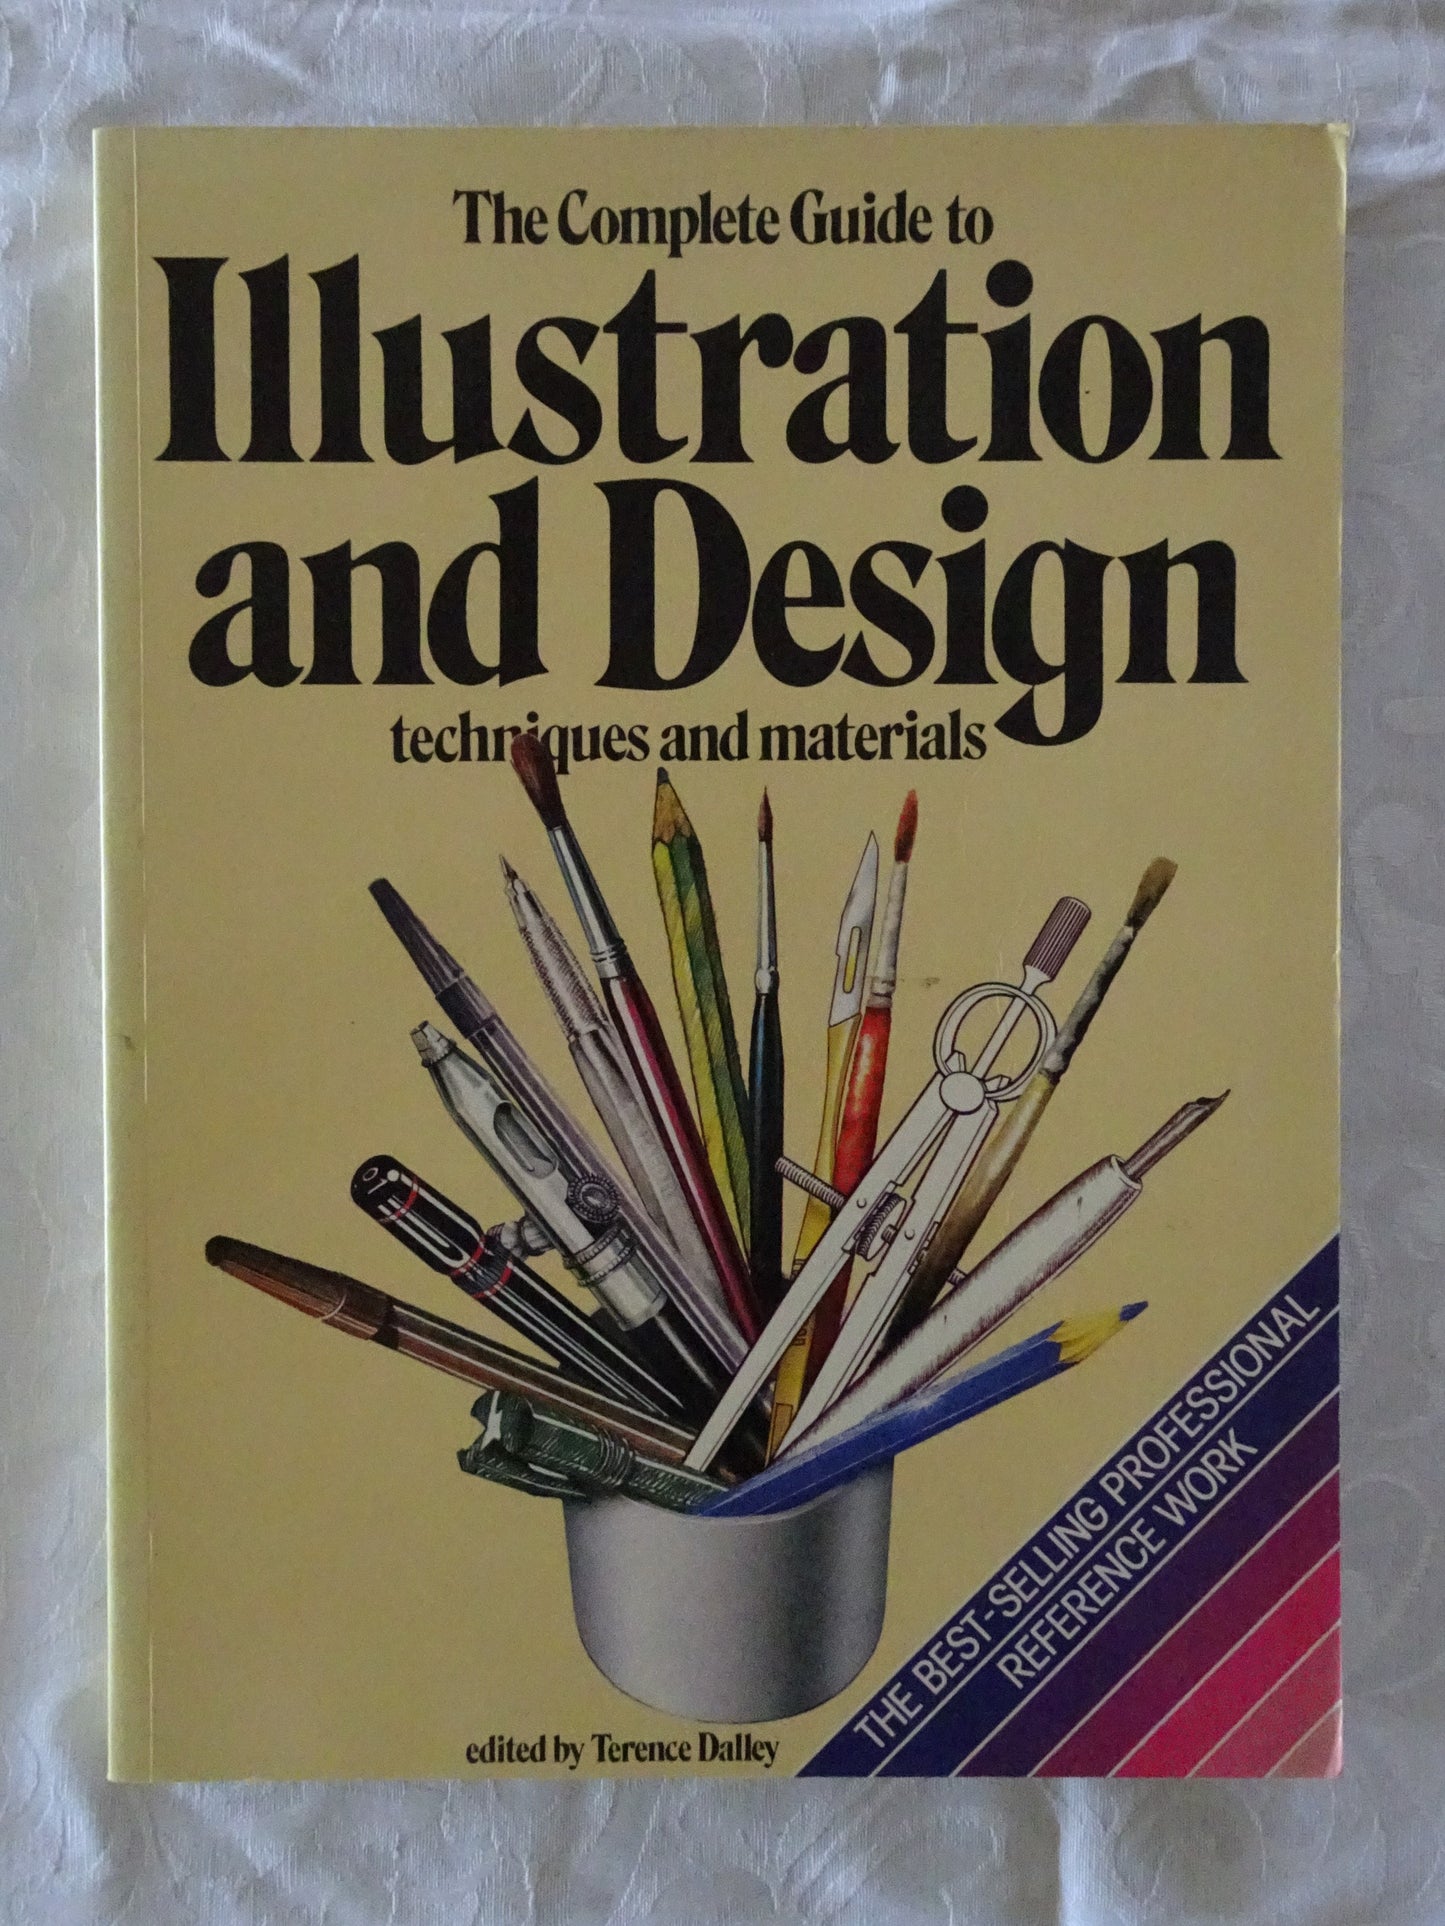 The Complete Guide to Illustration and Design  Techniques and Materials  by Terence Dalley